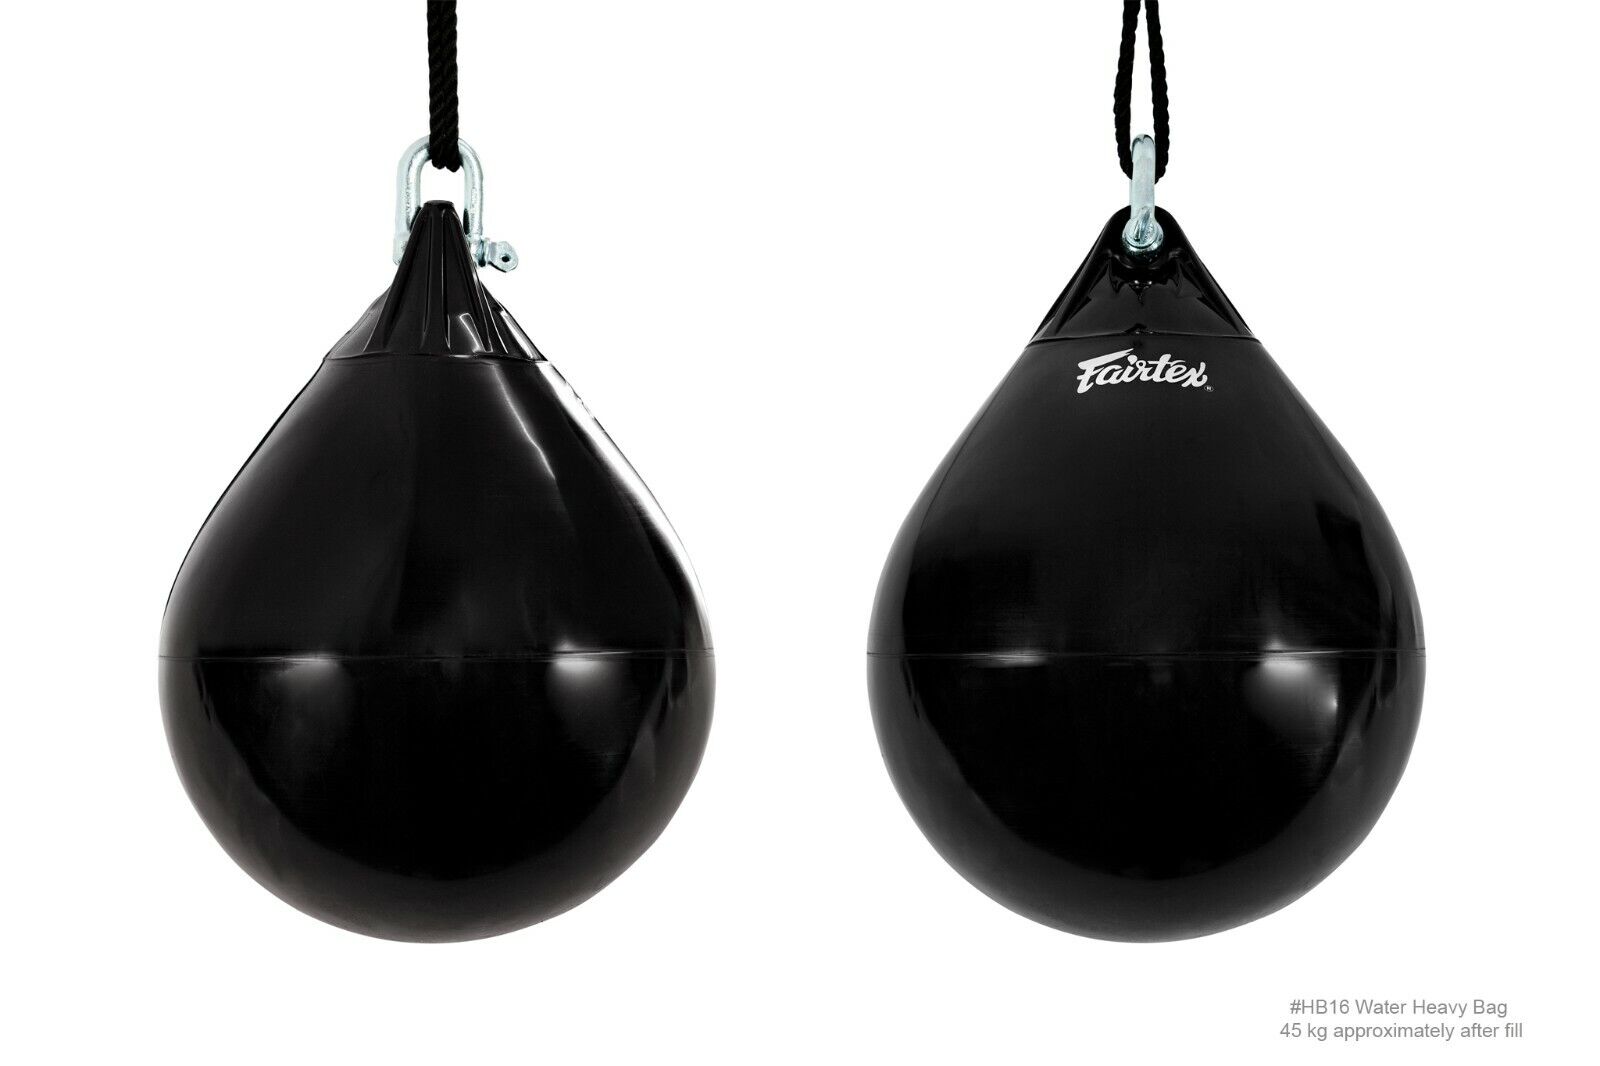 new genuine water heavy bag and punching